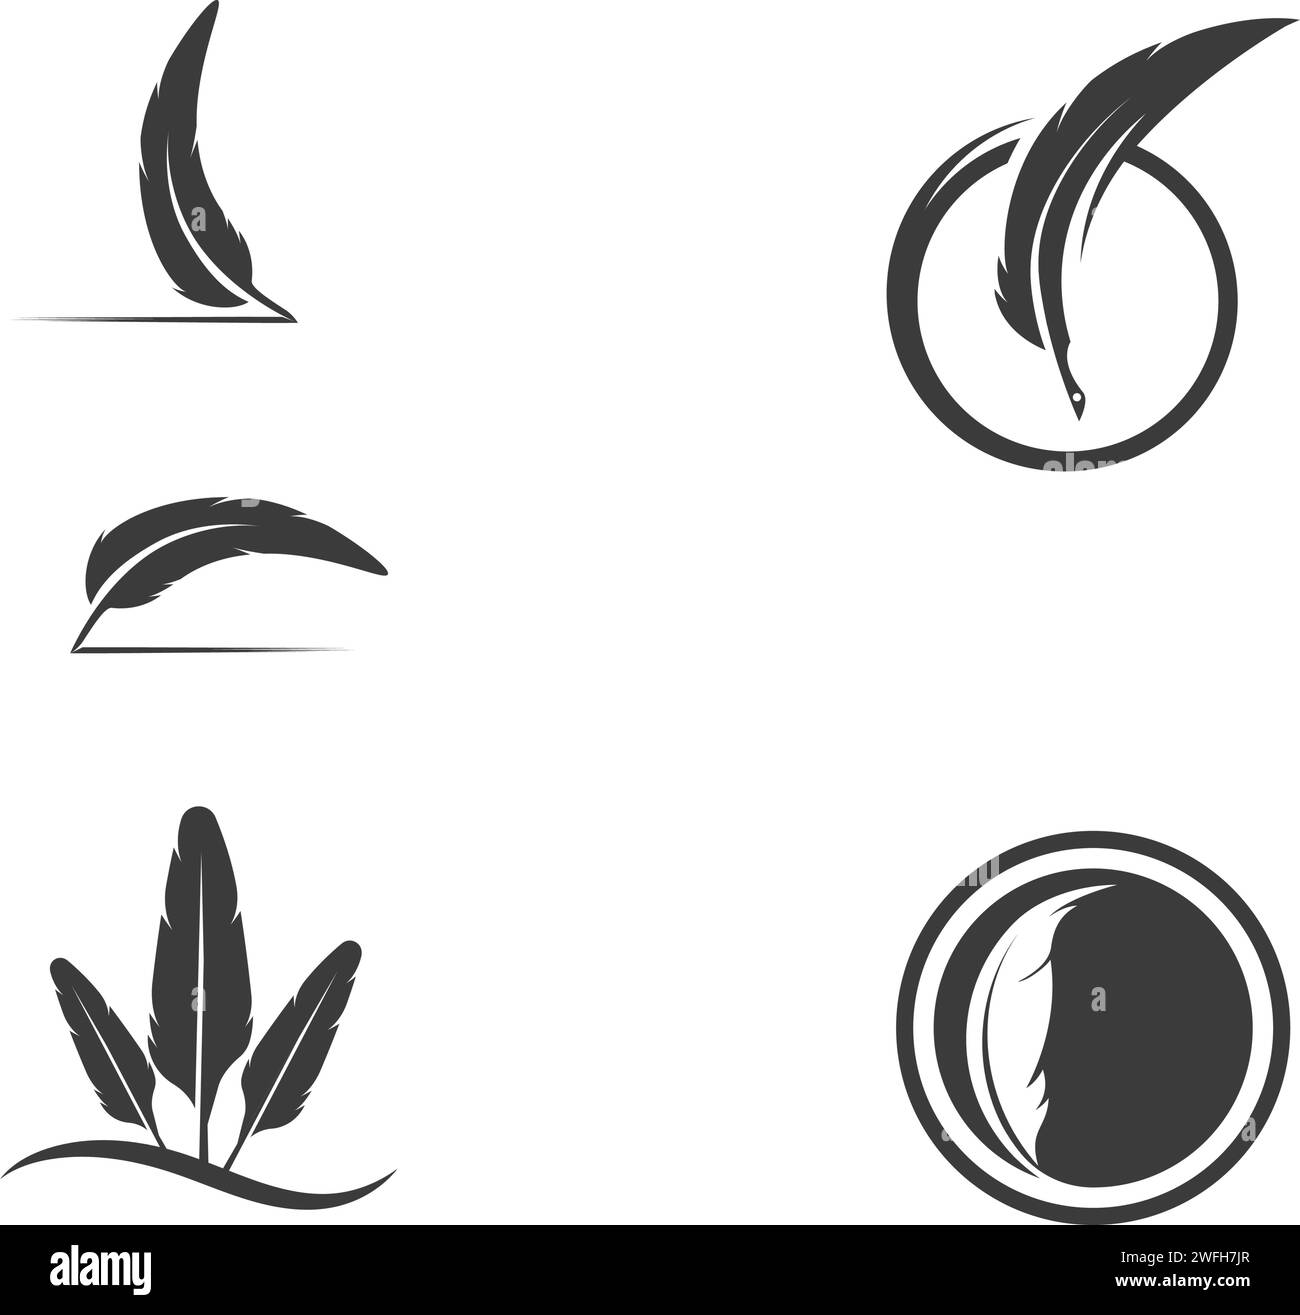 Feather pen icon template Vector illustration Stock Vector